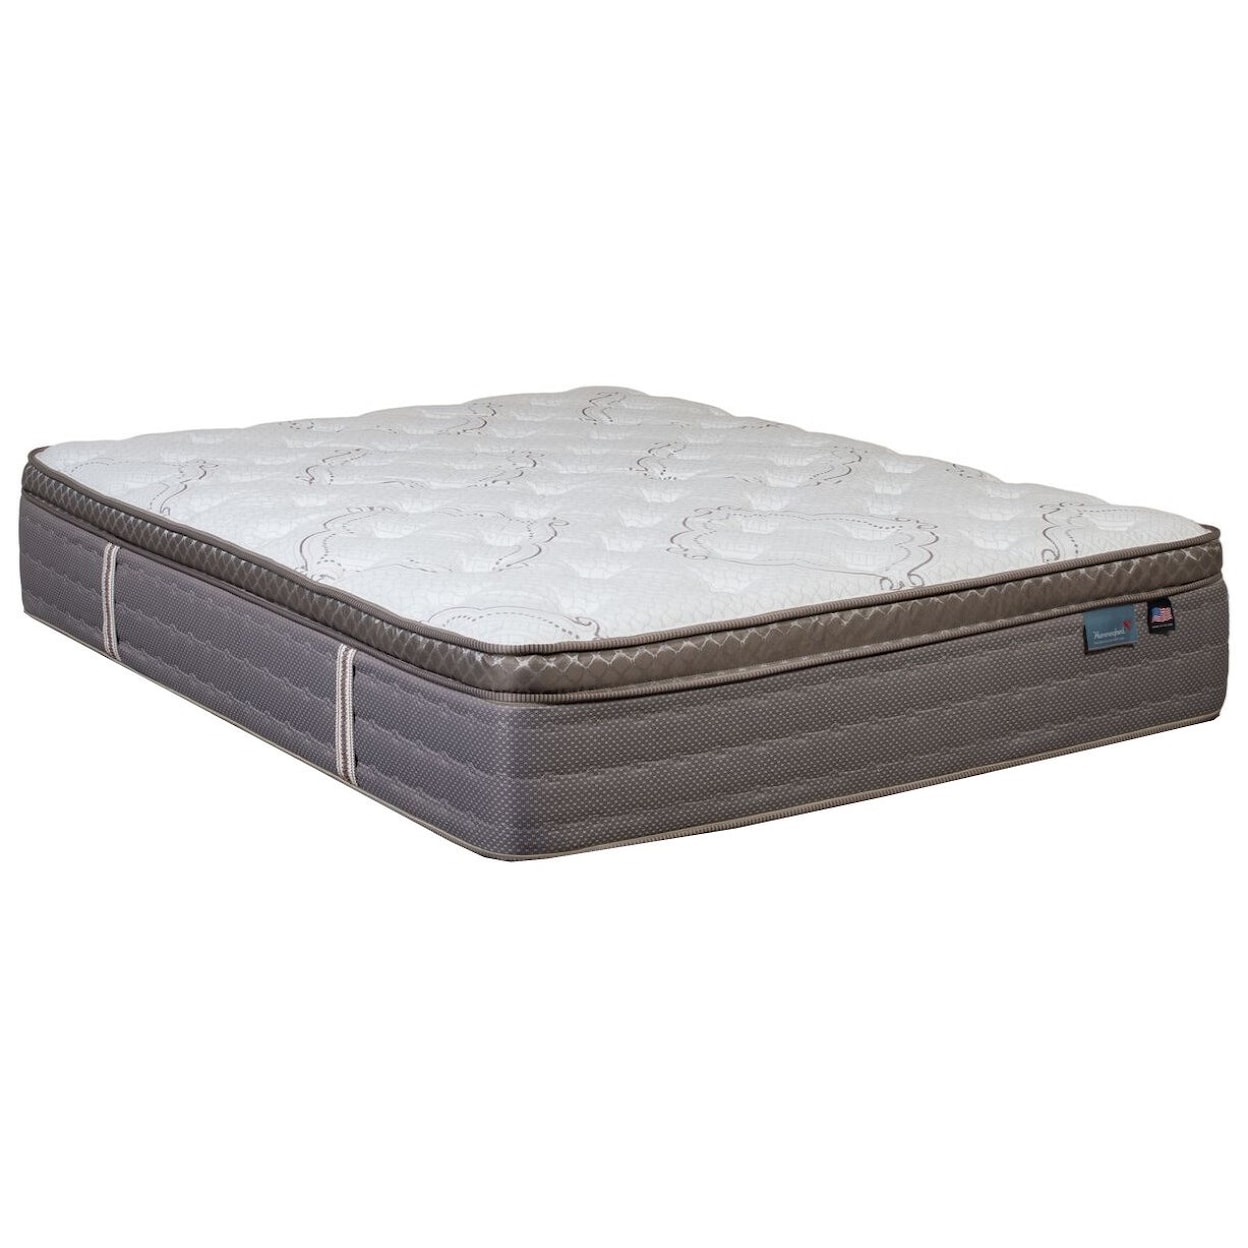 Therapedic Mystic Cloud Pillow Top Twin Pillow Top Pocketed Coil Mattress